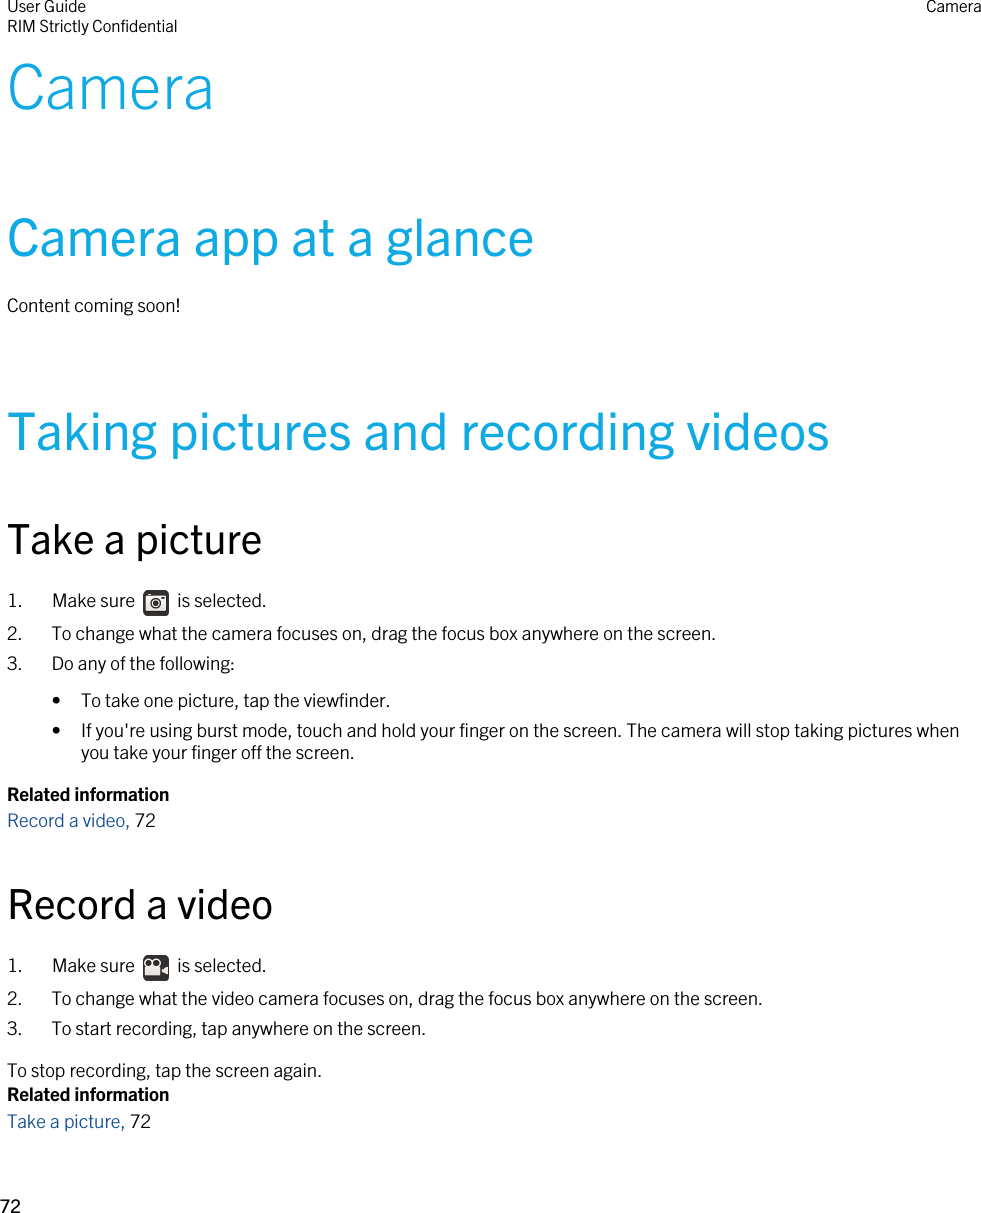 CameraCamera app at a glanceContent coming soon!Taking pictures and recording videosTake a picture1.  Make sure    is selected. 2. To change what the camera focuses on, drag the focus box anywhere on the screen.3. Do any of the following:• To take one picture, tap the viewfinder.• If you&apos;re using burst mode, touch and hold your finger on the screen. The camera will stop taking pictures when you take your finger off the screen.Related informationRecord a video, 72Record a video1.  Make sure    is selected. 2. To change what the video camera focuses on, drag the focus box anywhere on the screen.3. To start recording, tap anywhere on the screen.To stop recording, tap the screen again.Related informationTake a picture, 72 User GuideRIM Strictly ConfidentialCamera72 